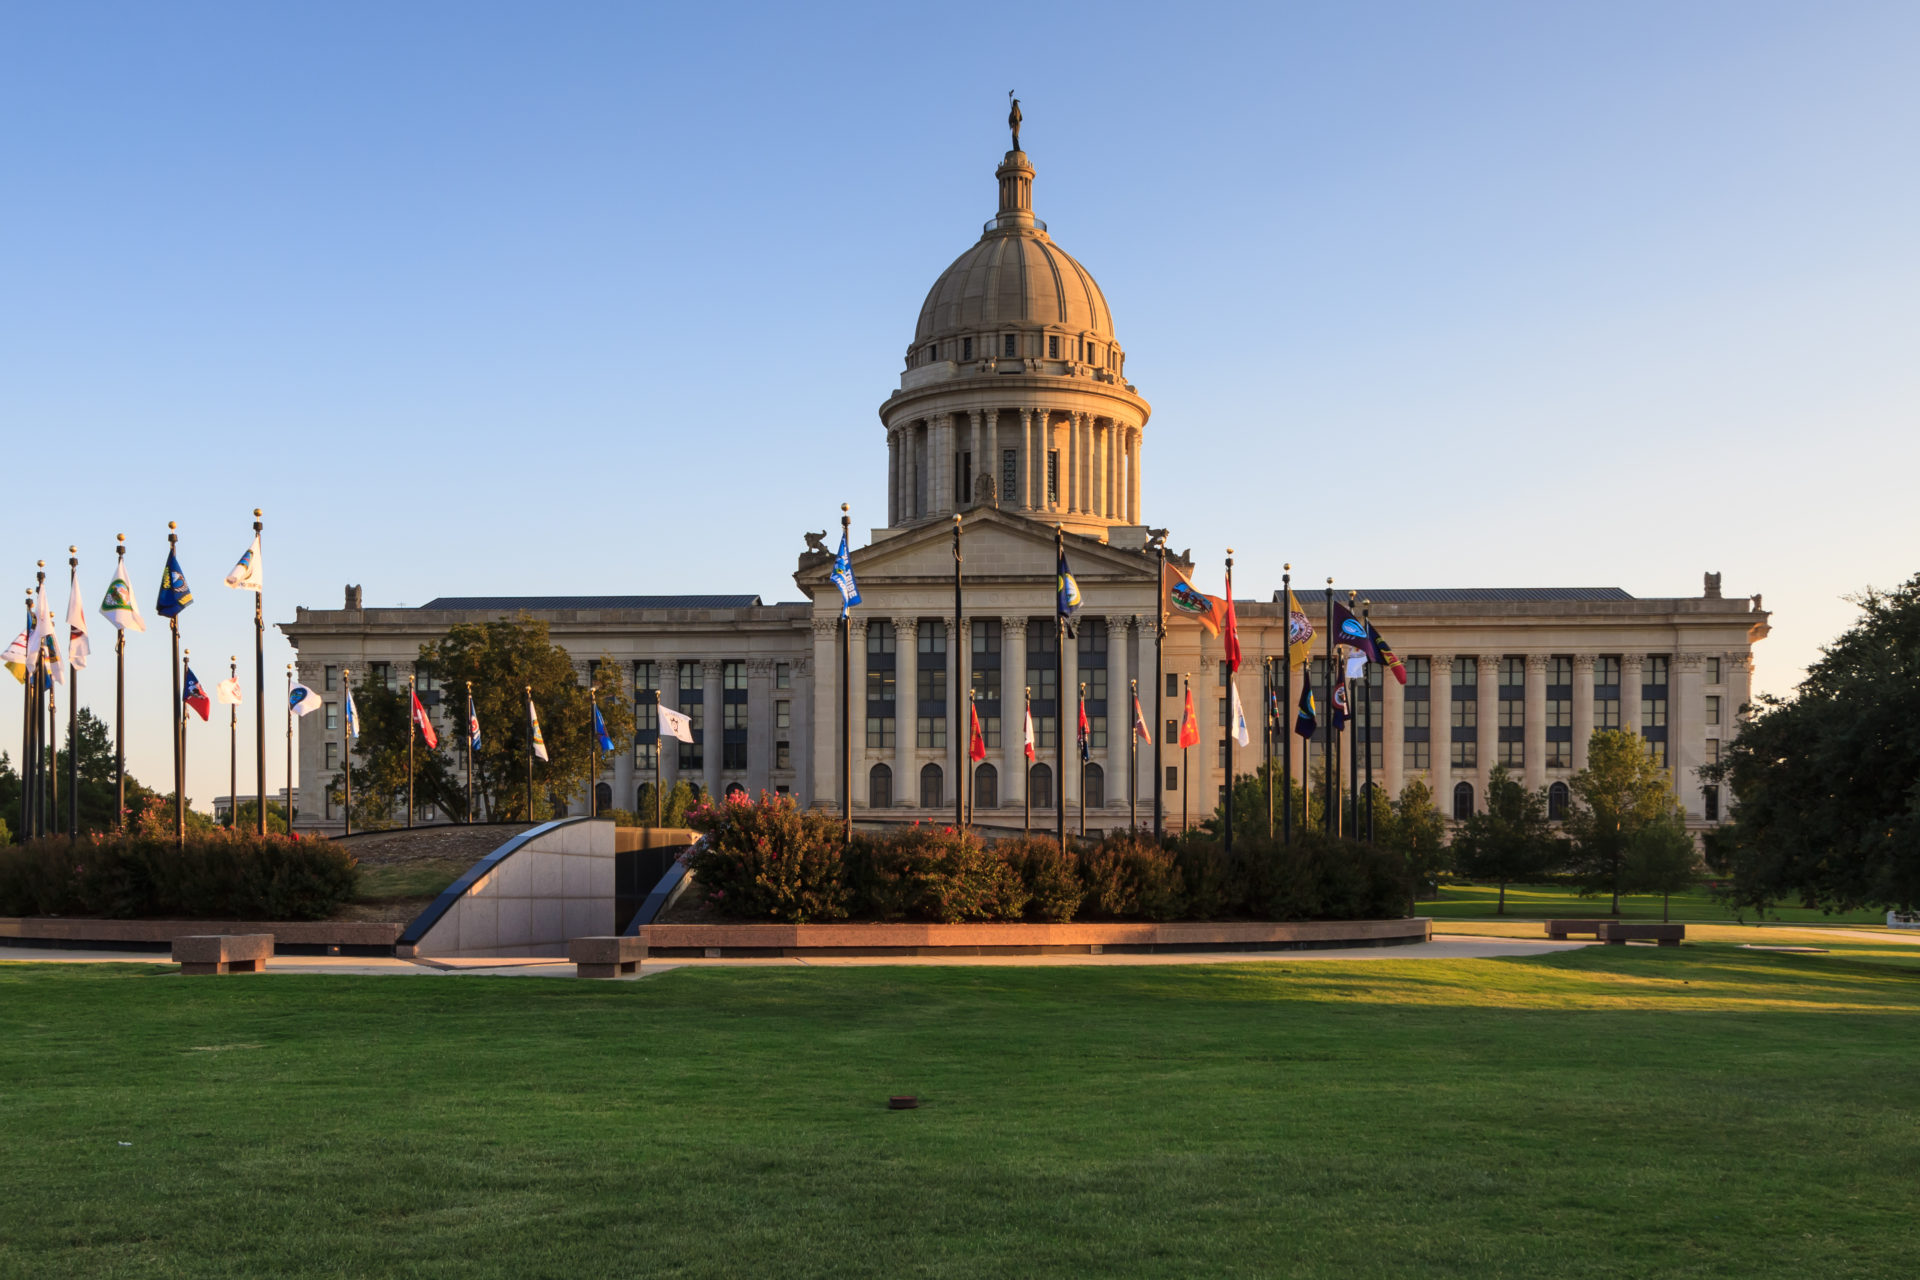 Okla. CAIR to Host ‘Muslim Day at the Capitol’ Event in Oklahoma City on February 26